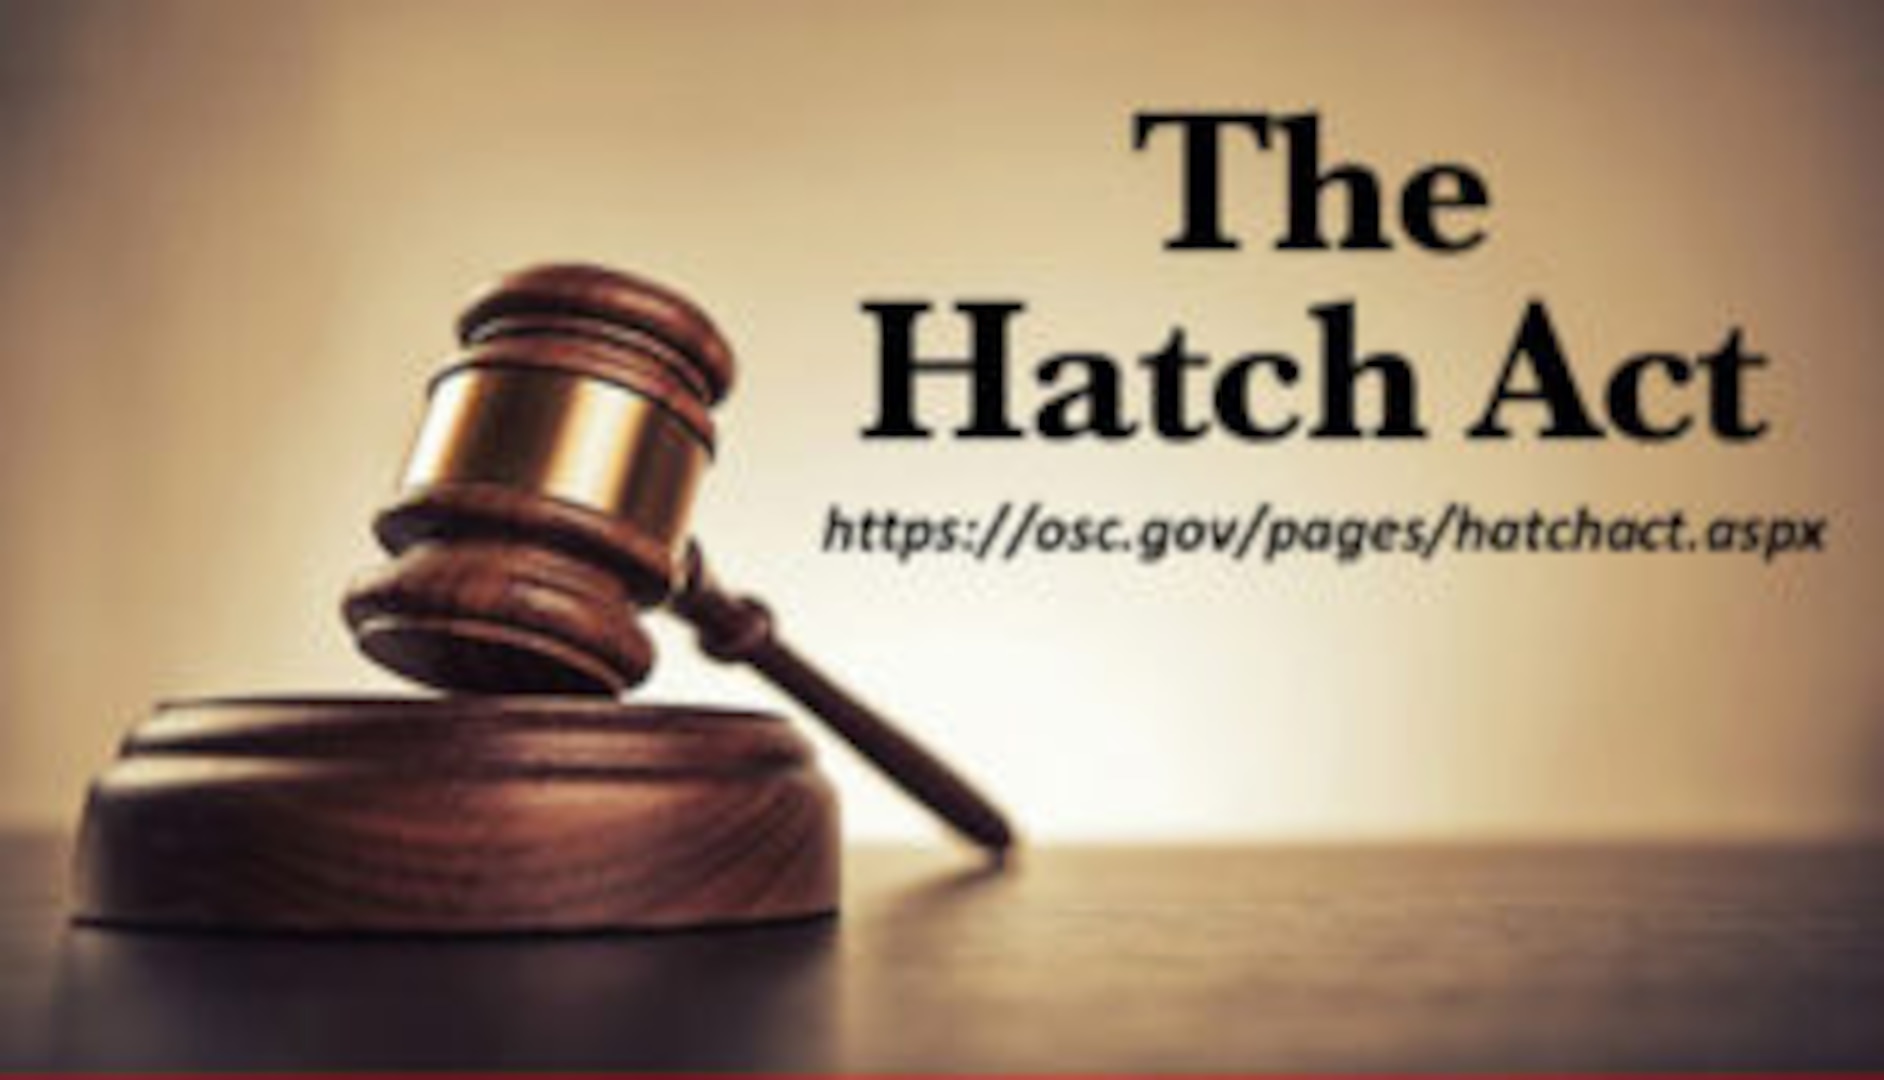 The law restricting federal employees from engaging in certain political activities is in Title 5 of the United States Code, Sections 7321-7326, and Title 5 of the Code of Federal Regulations, parts 733 and 734, commonly referred to as the Hatch Act. It defines political activity as “an activity directed toward the success or failure of a political party, candidate for partisan political office or partisan political group.”